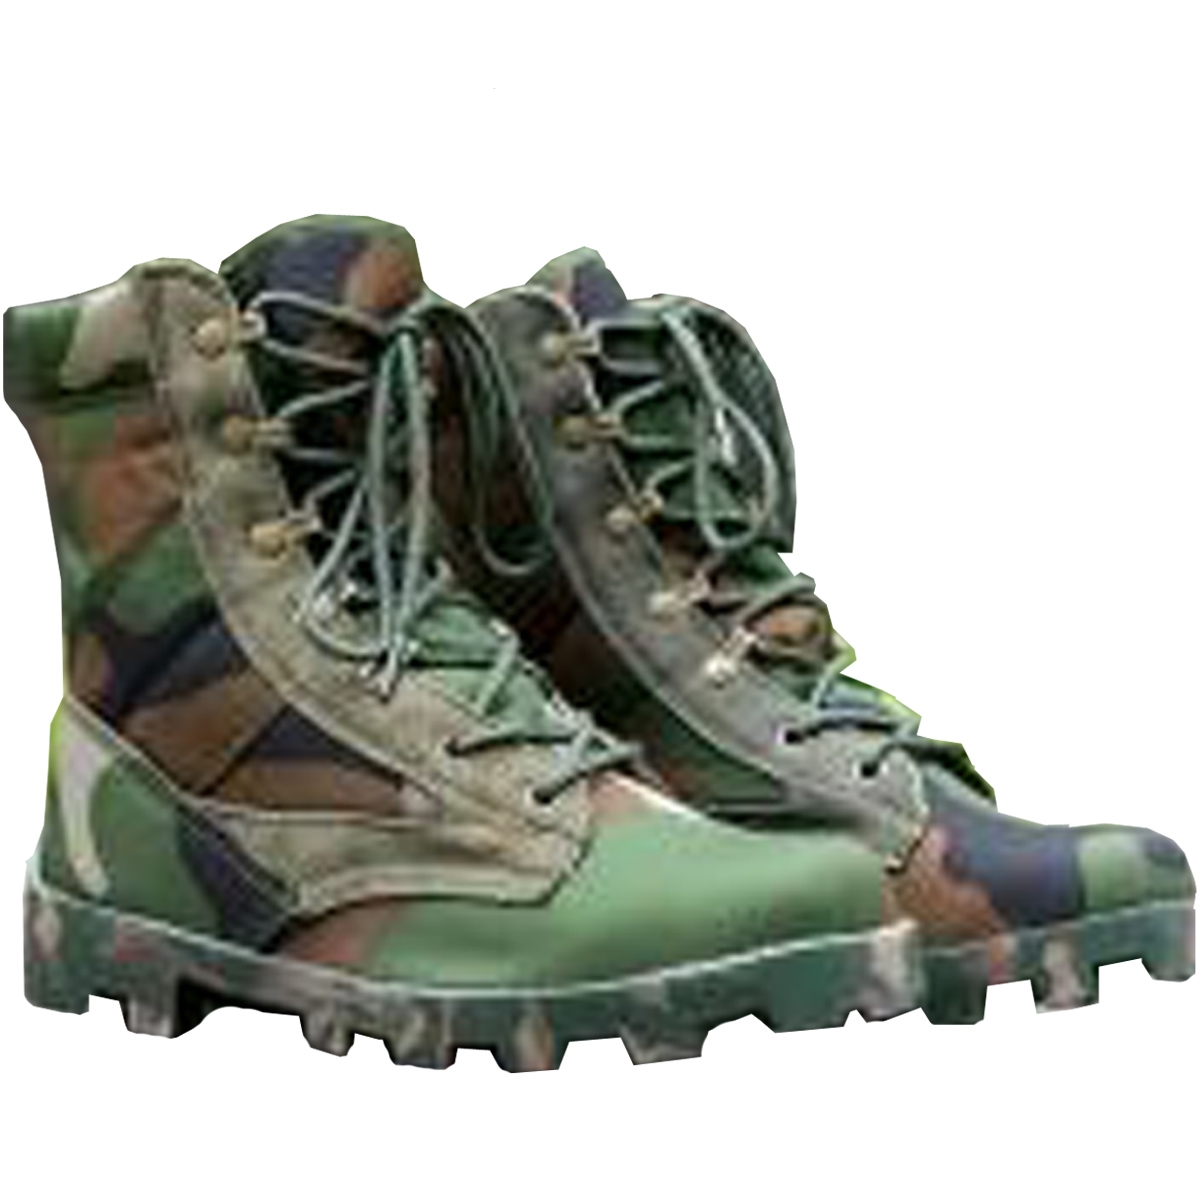 camouflage work boots